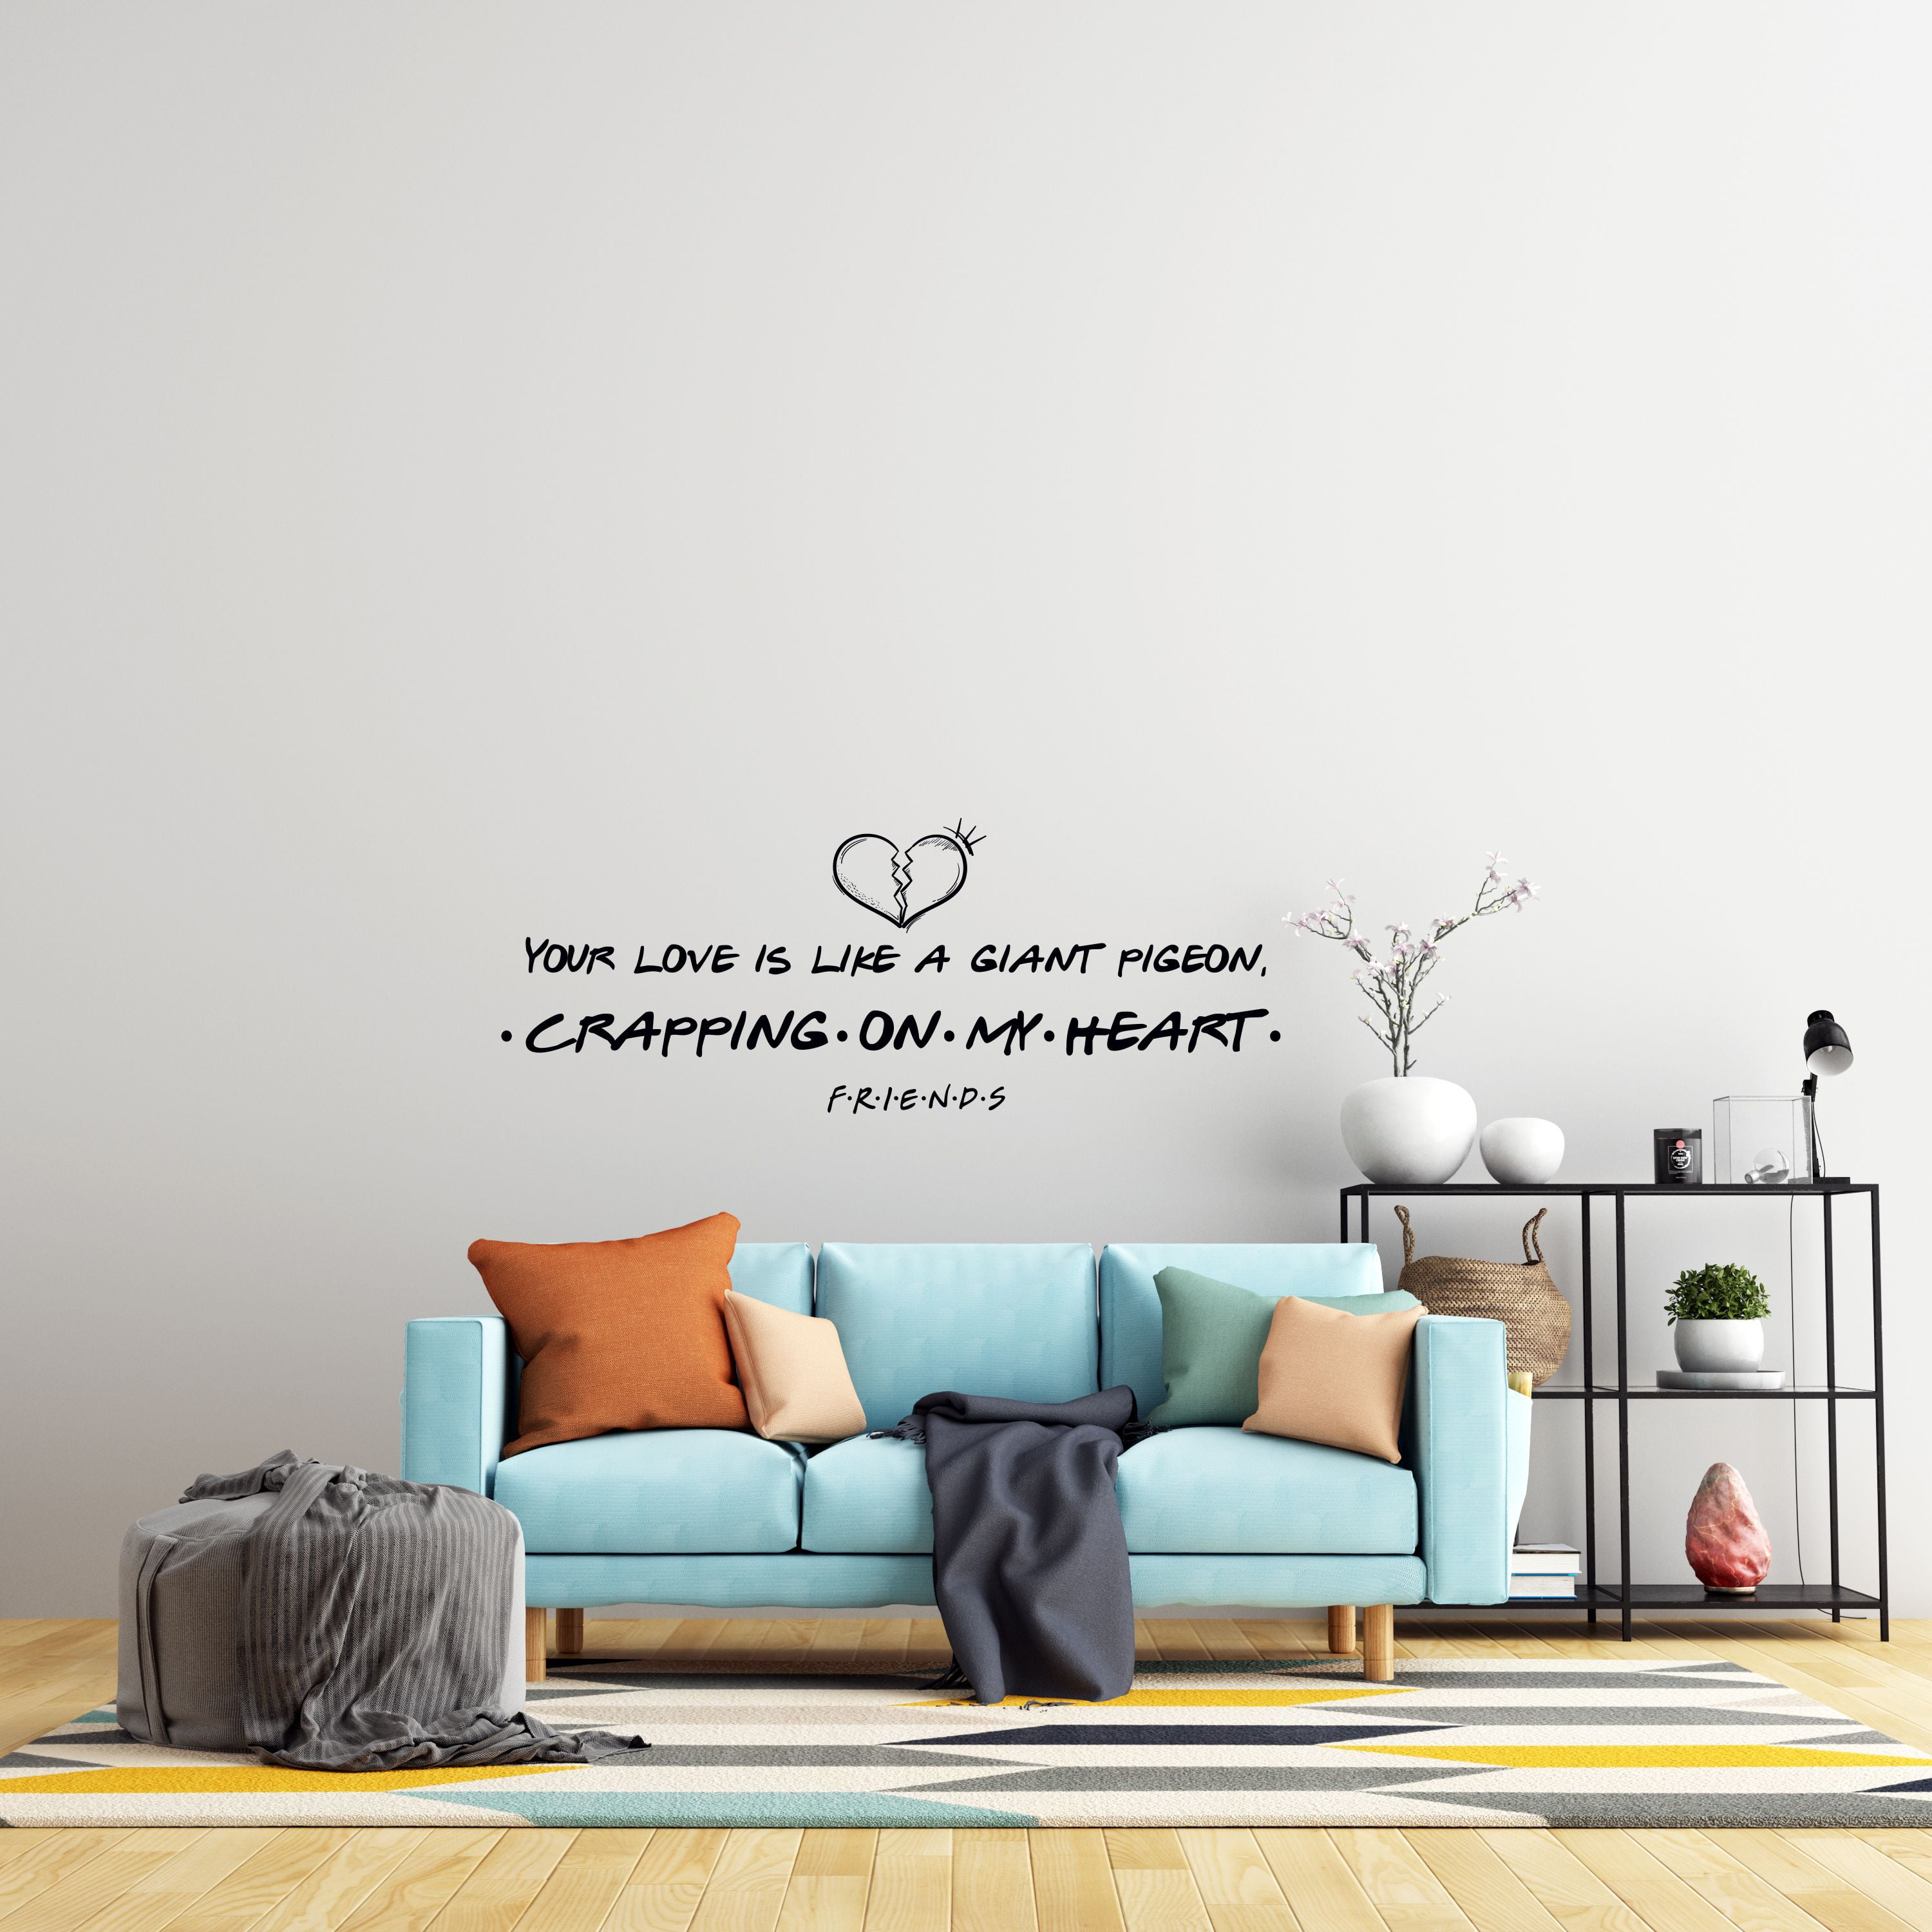 Sarcastic Witty Peel and Stick Adhesive Decals I Want to Be A Nice Person But Everyone is So Stupid 7 x 30 Vinyl Wall Art Decal Adult Humor Home Living Room Bedroom Sticker Decor